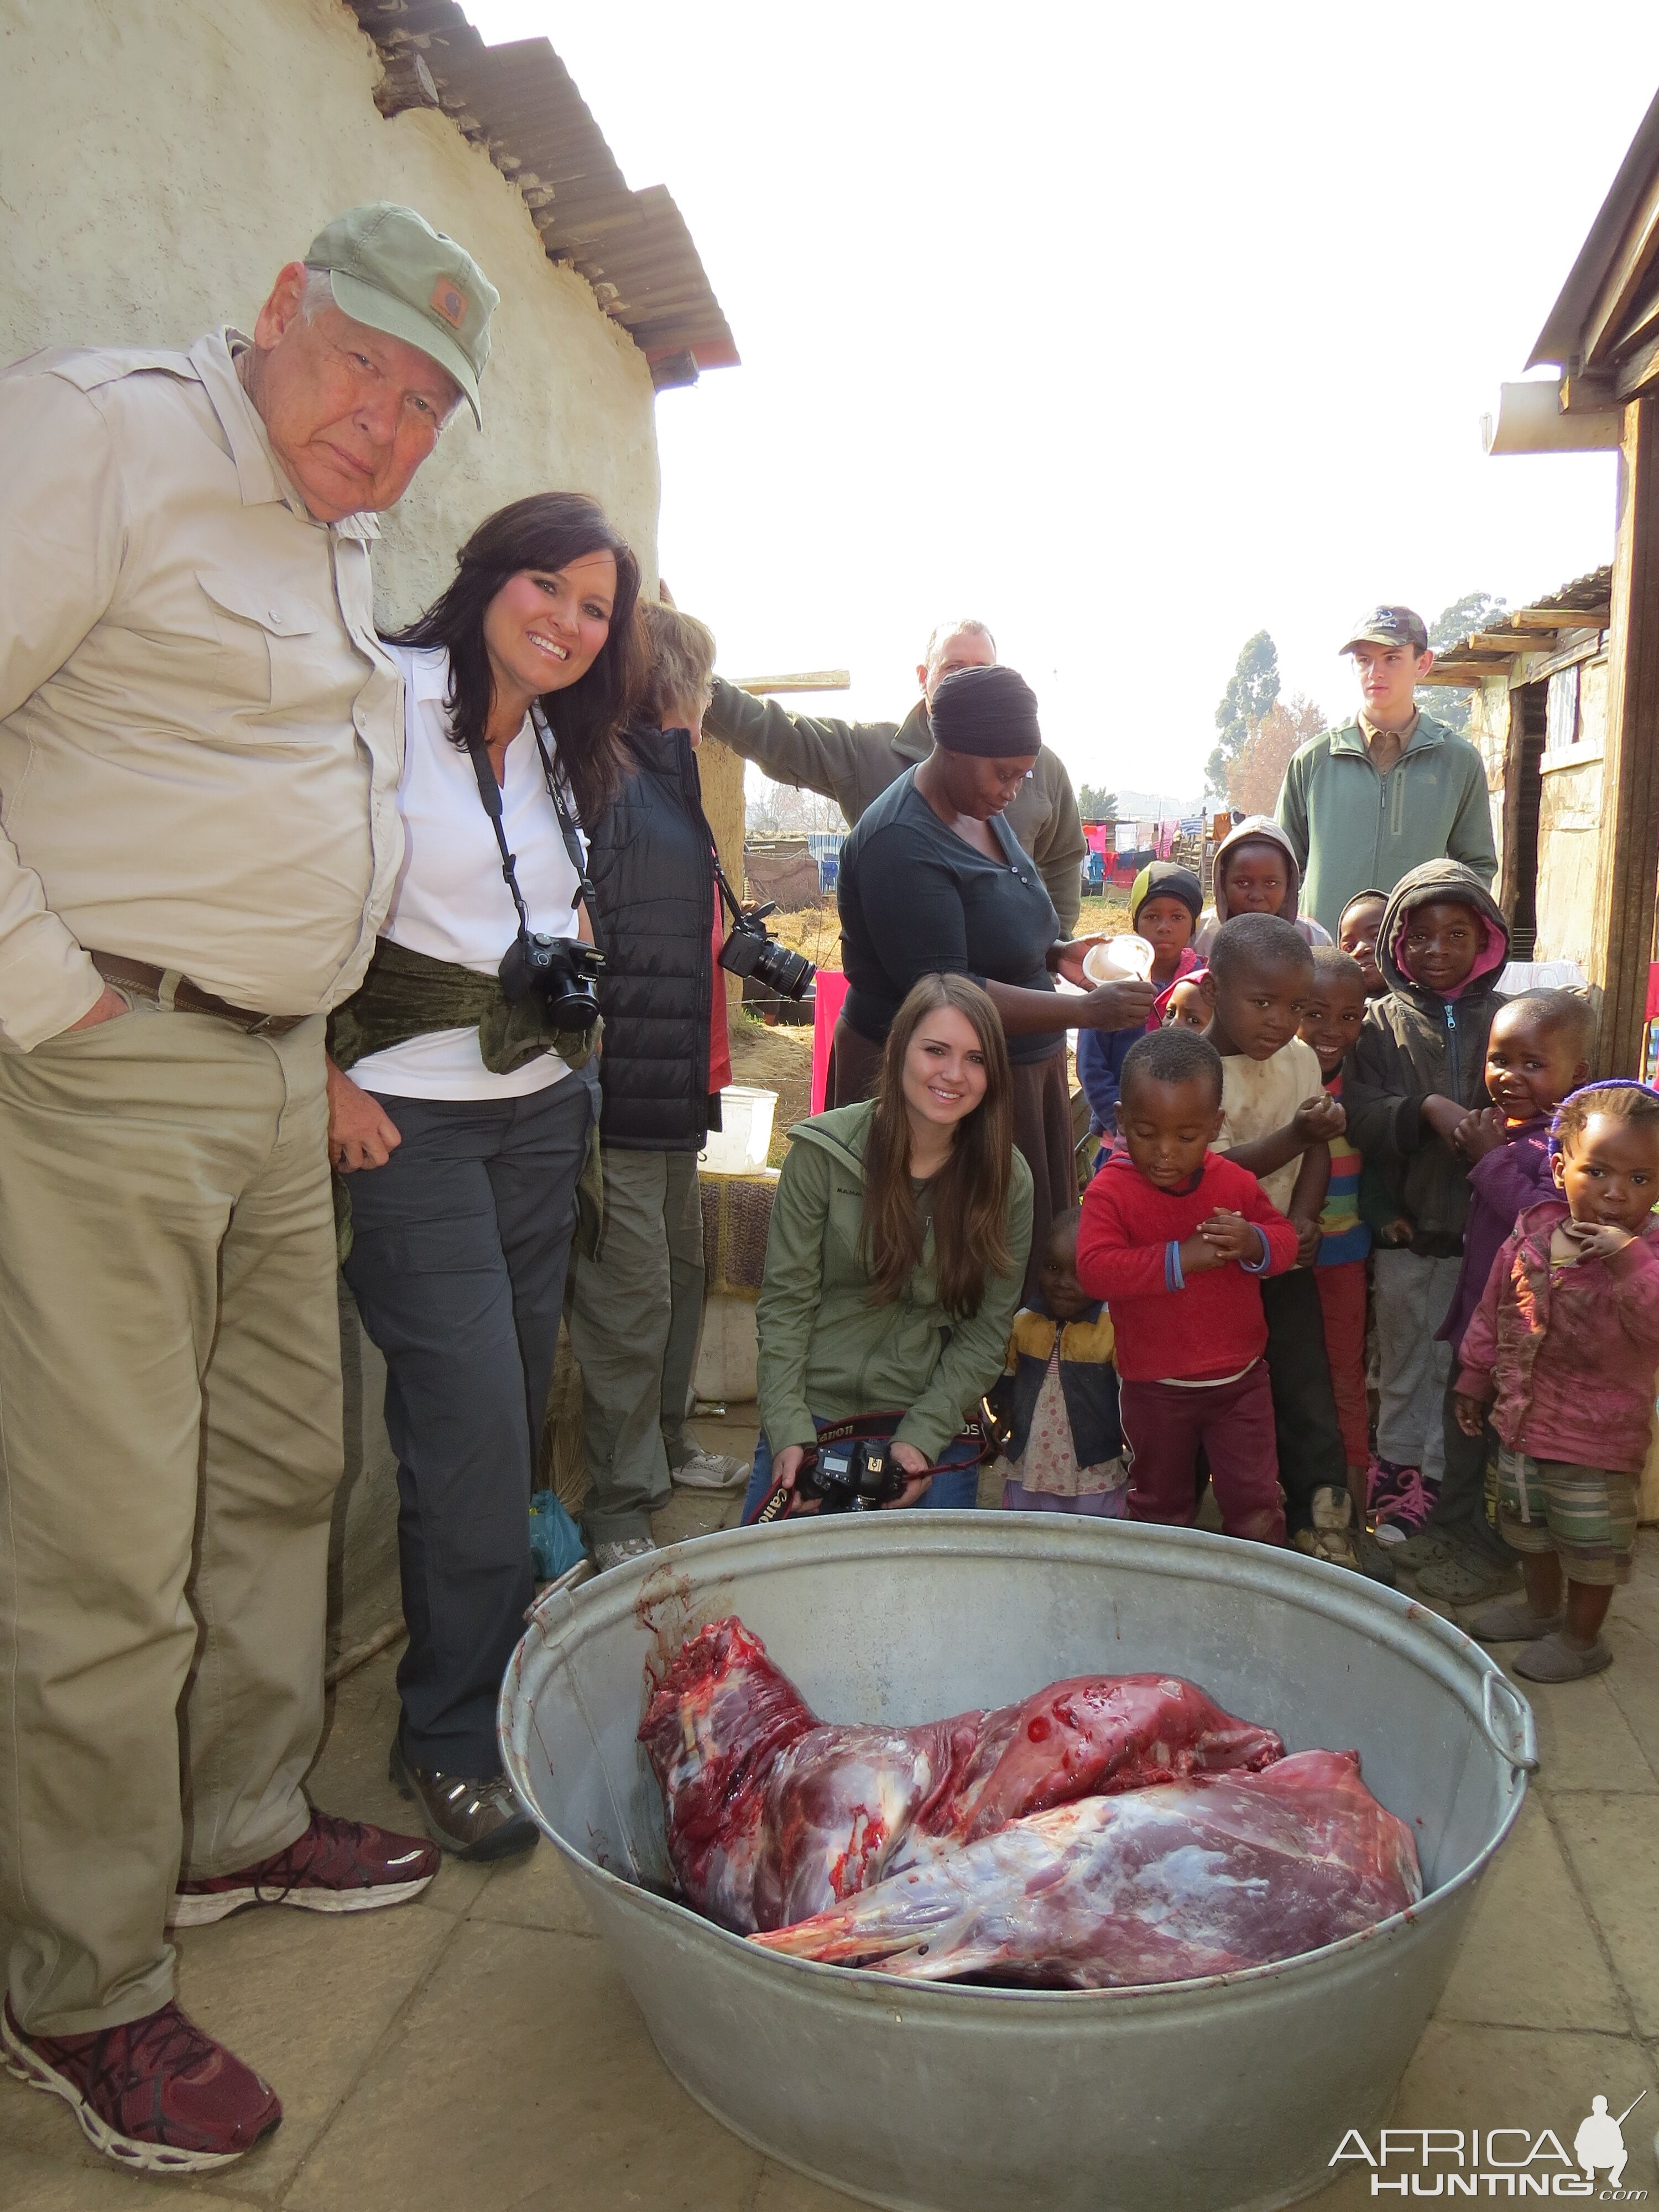 Family safari: delivering meat and other desperately needed items to a poor community.